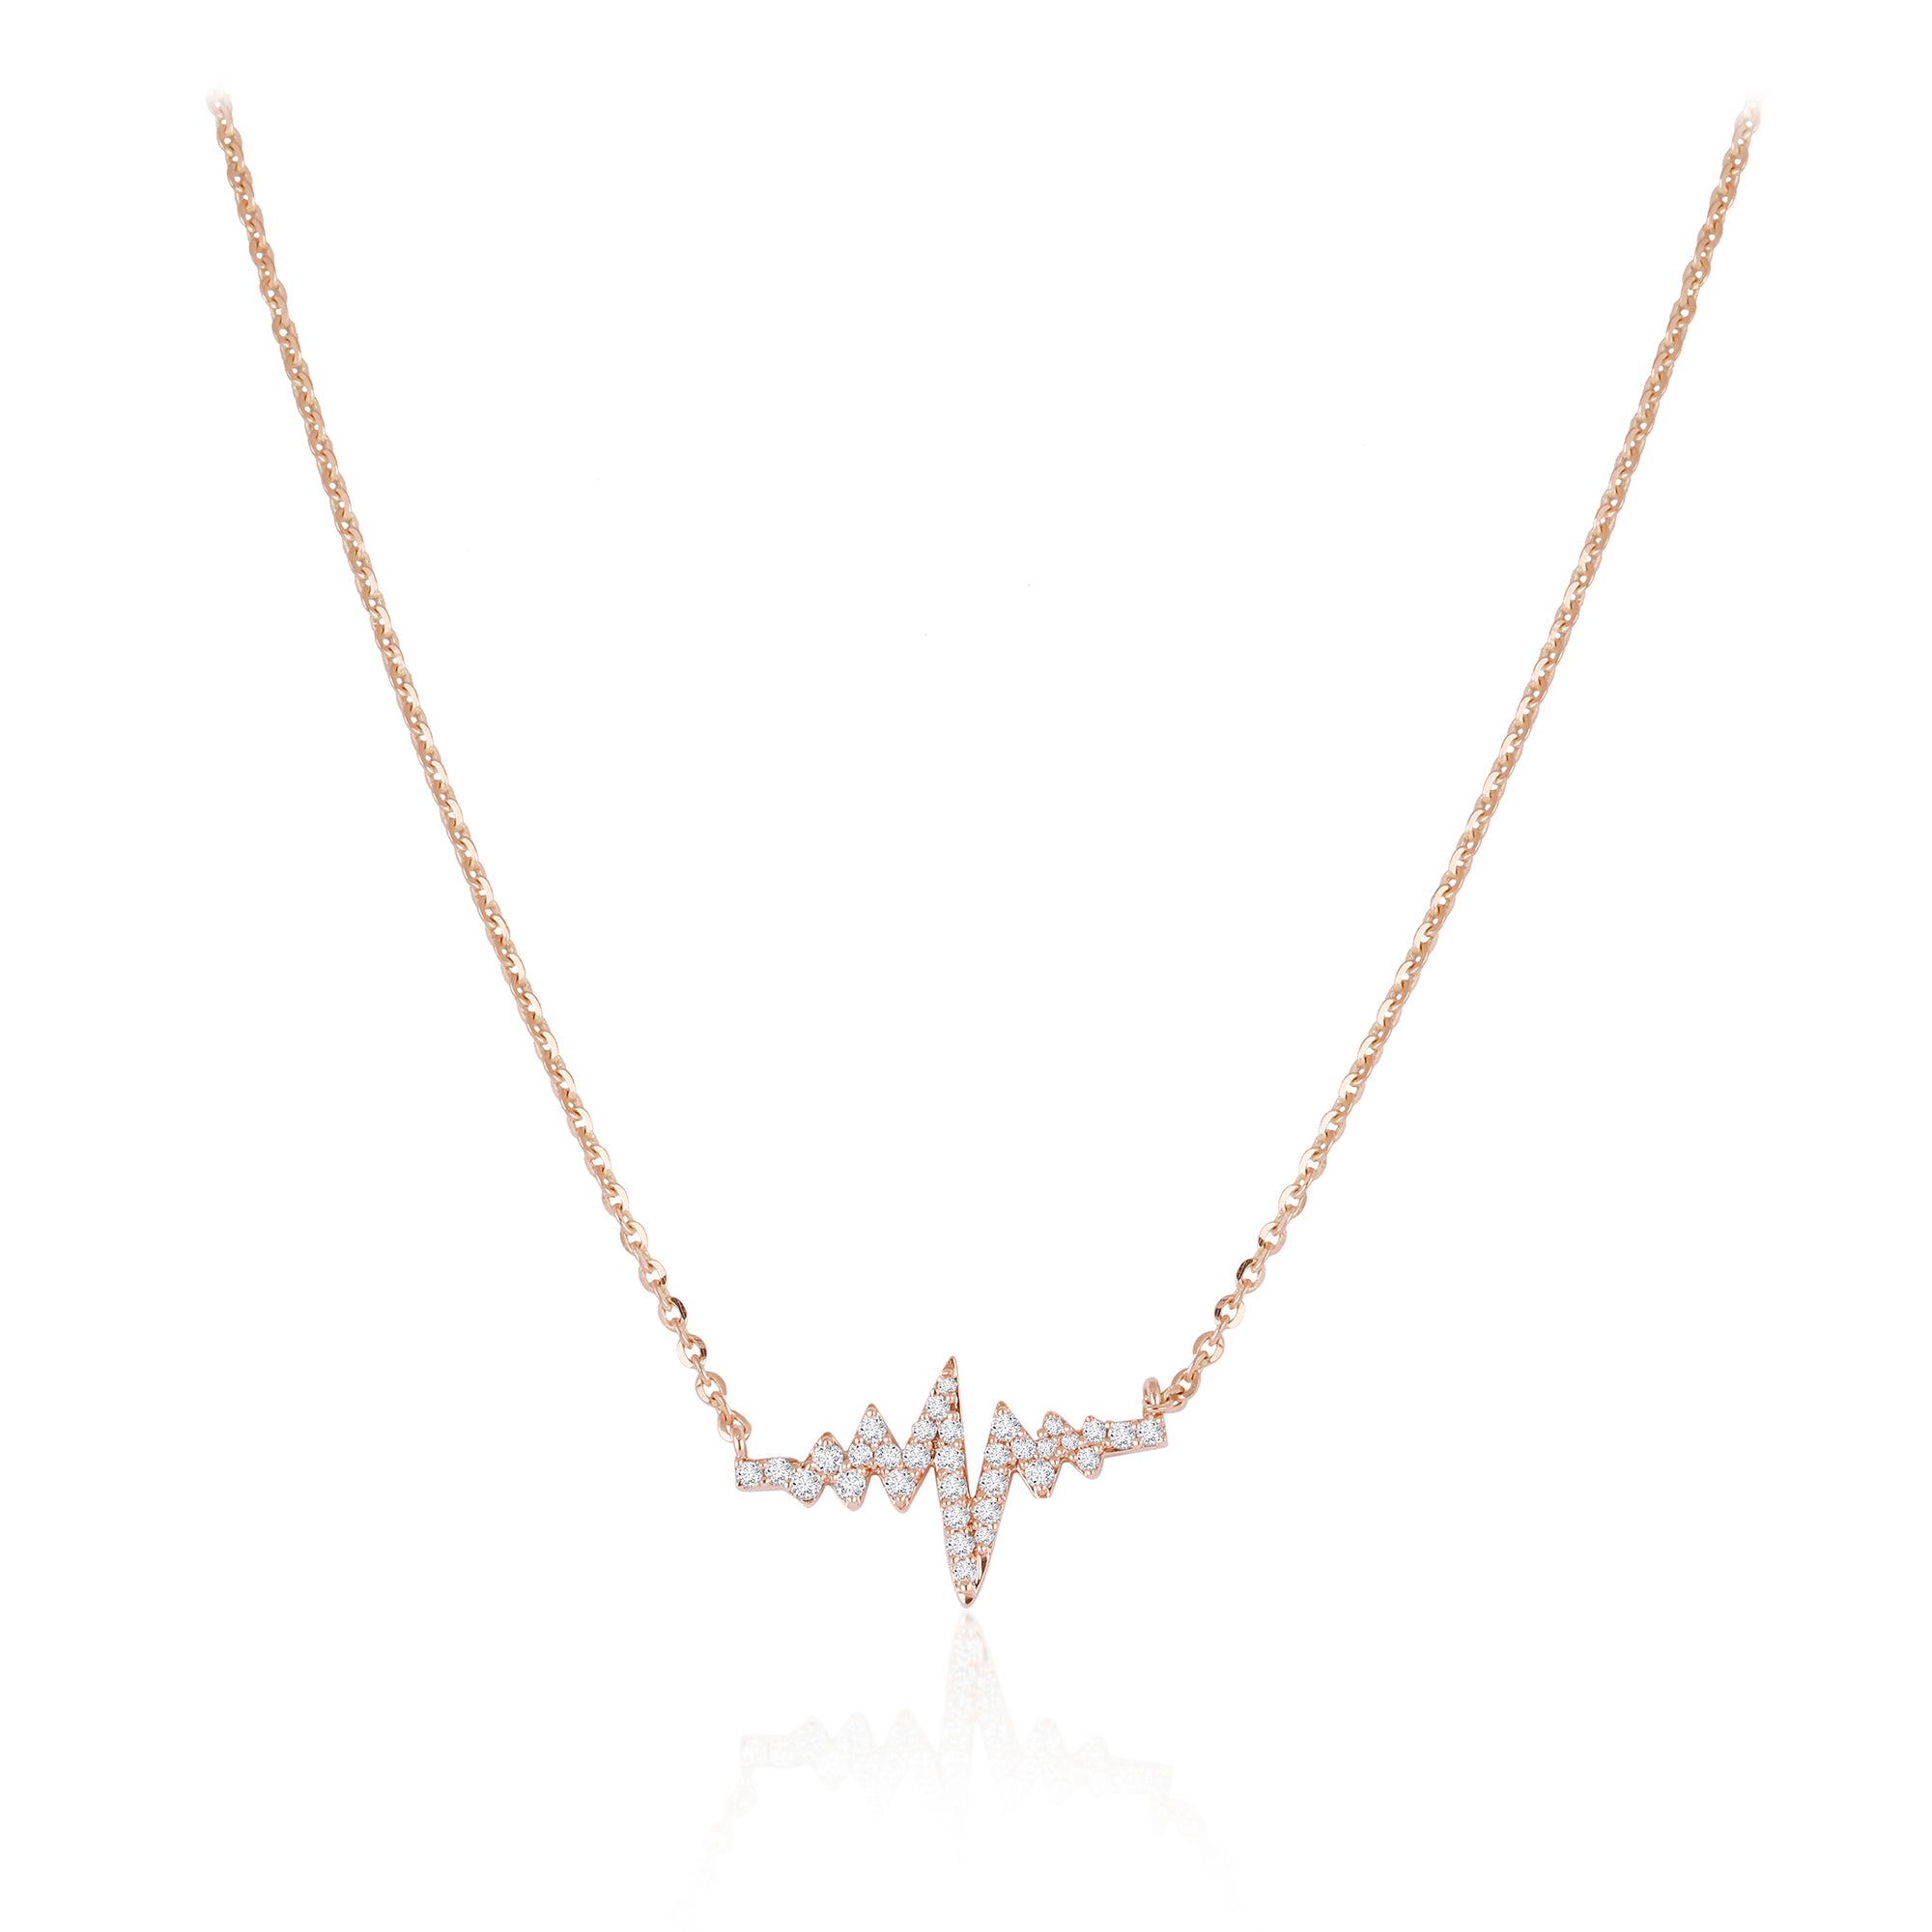 Adjustable Heartbeat Pendant Necklace in 14k White Gold - MD1